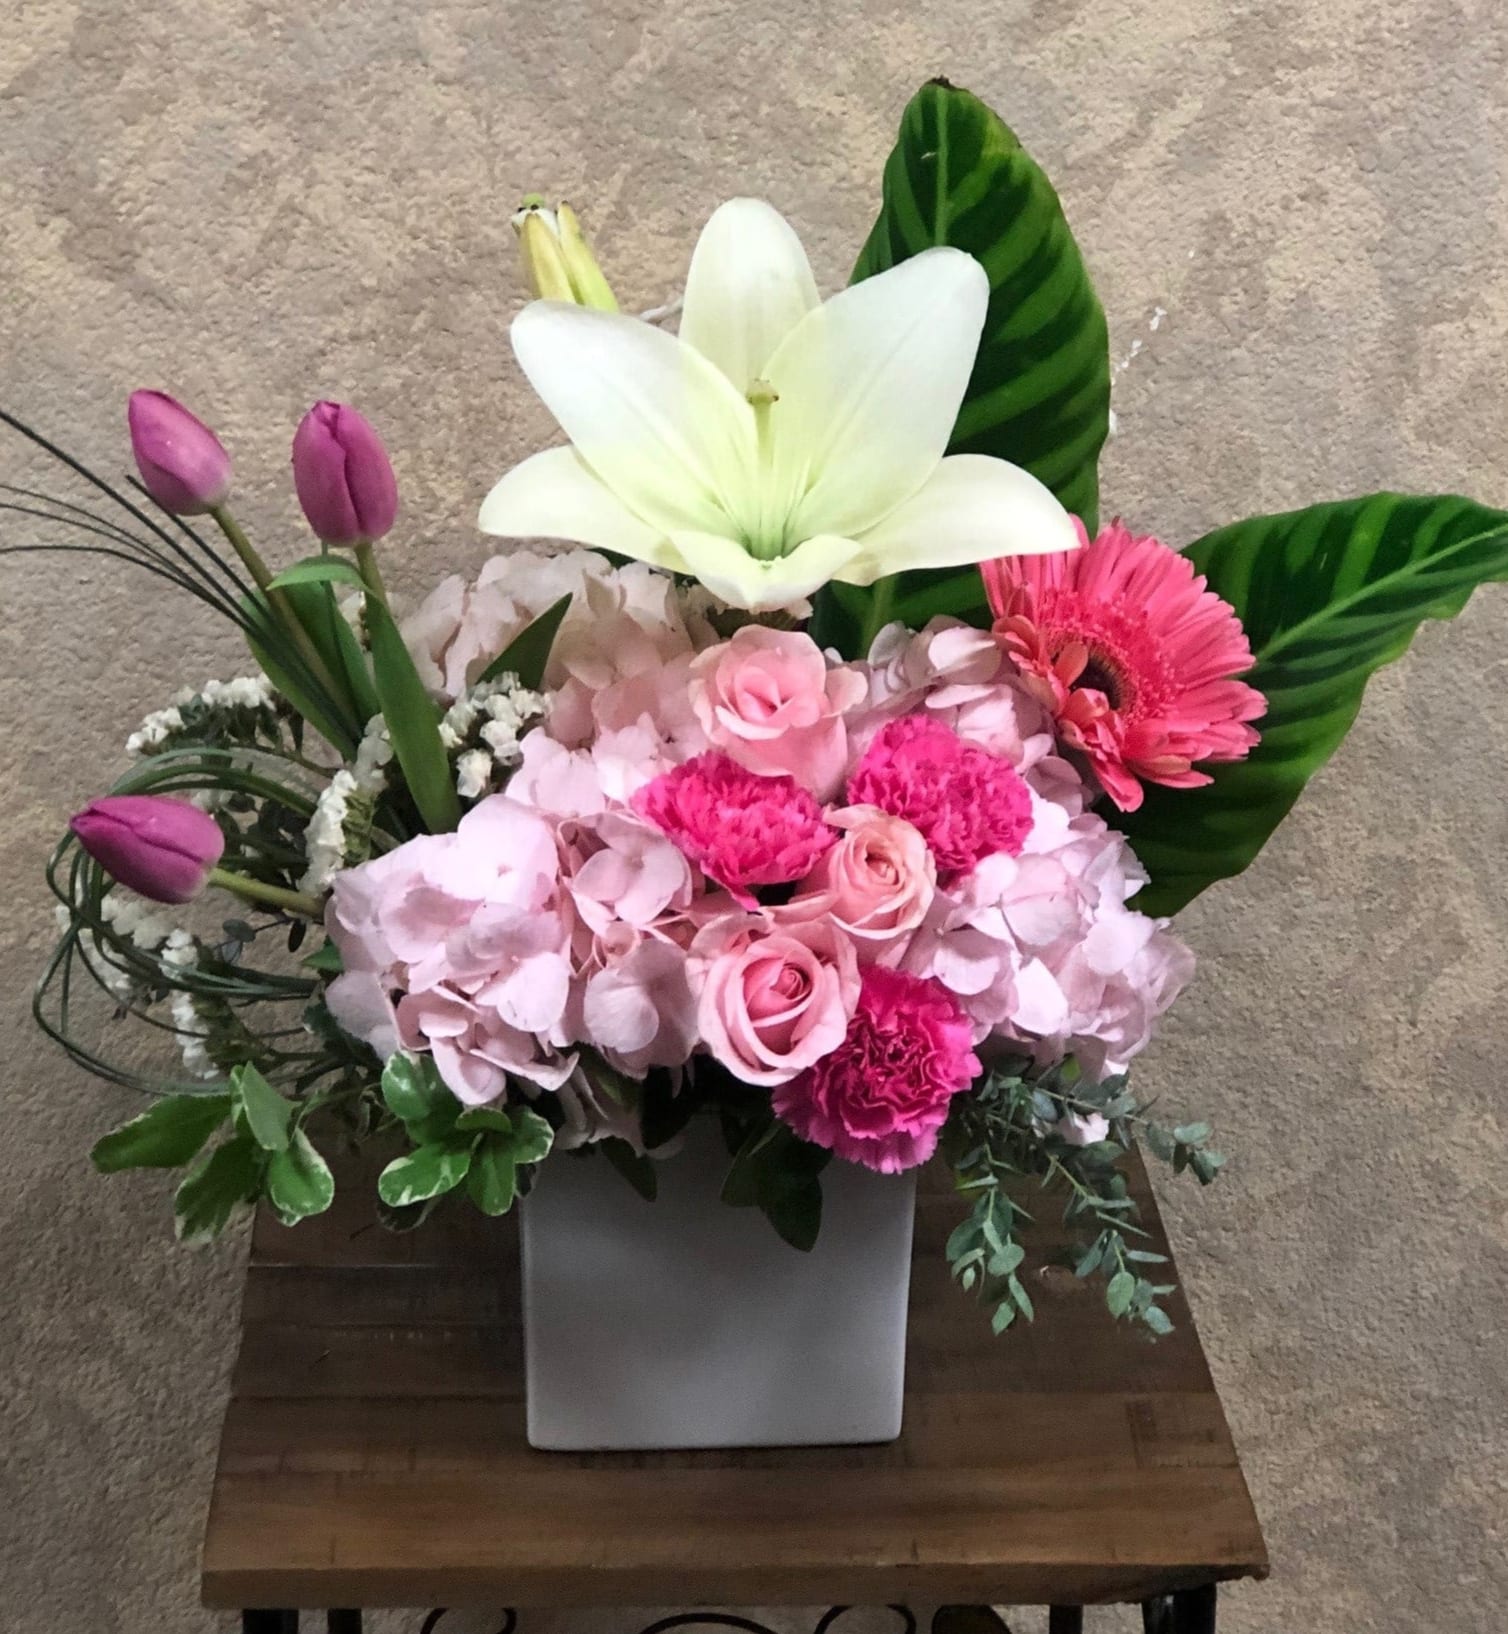 Santorini, Greece - Type of Flowers: White Lilies, Pink and White Hydrangeas, Pink Roses, Pink Gerberas, Pink Carnations, Purple Tulips and more in a square white vase. Availability: All year round Substitute Available: Yes Design View: Symmetric Front Facing View Photo shown: Regular